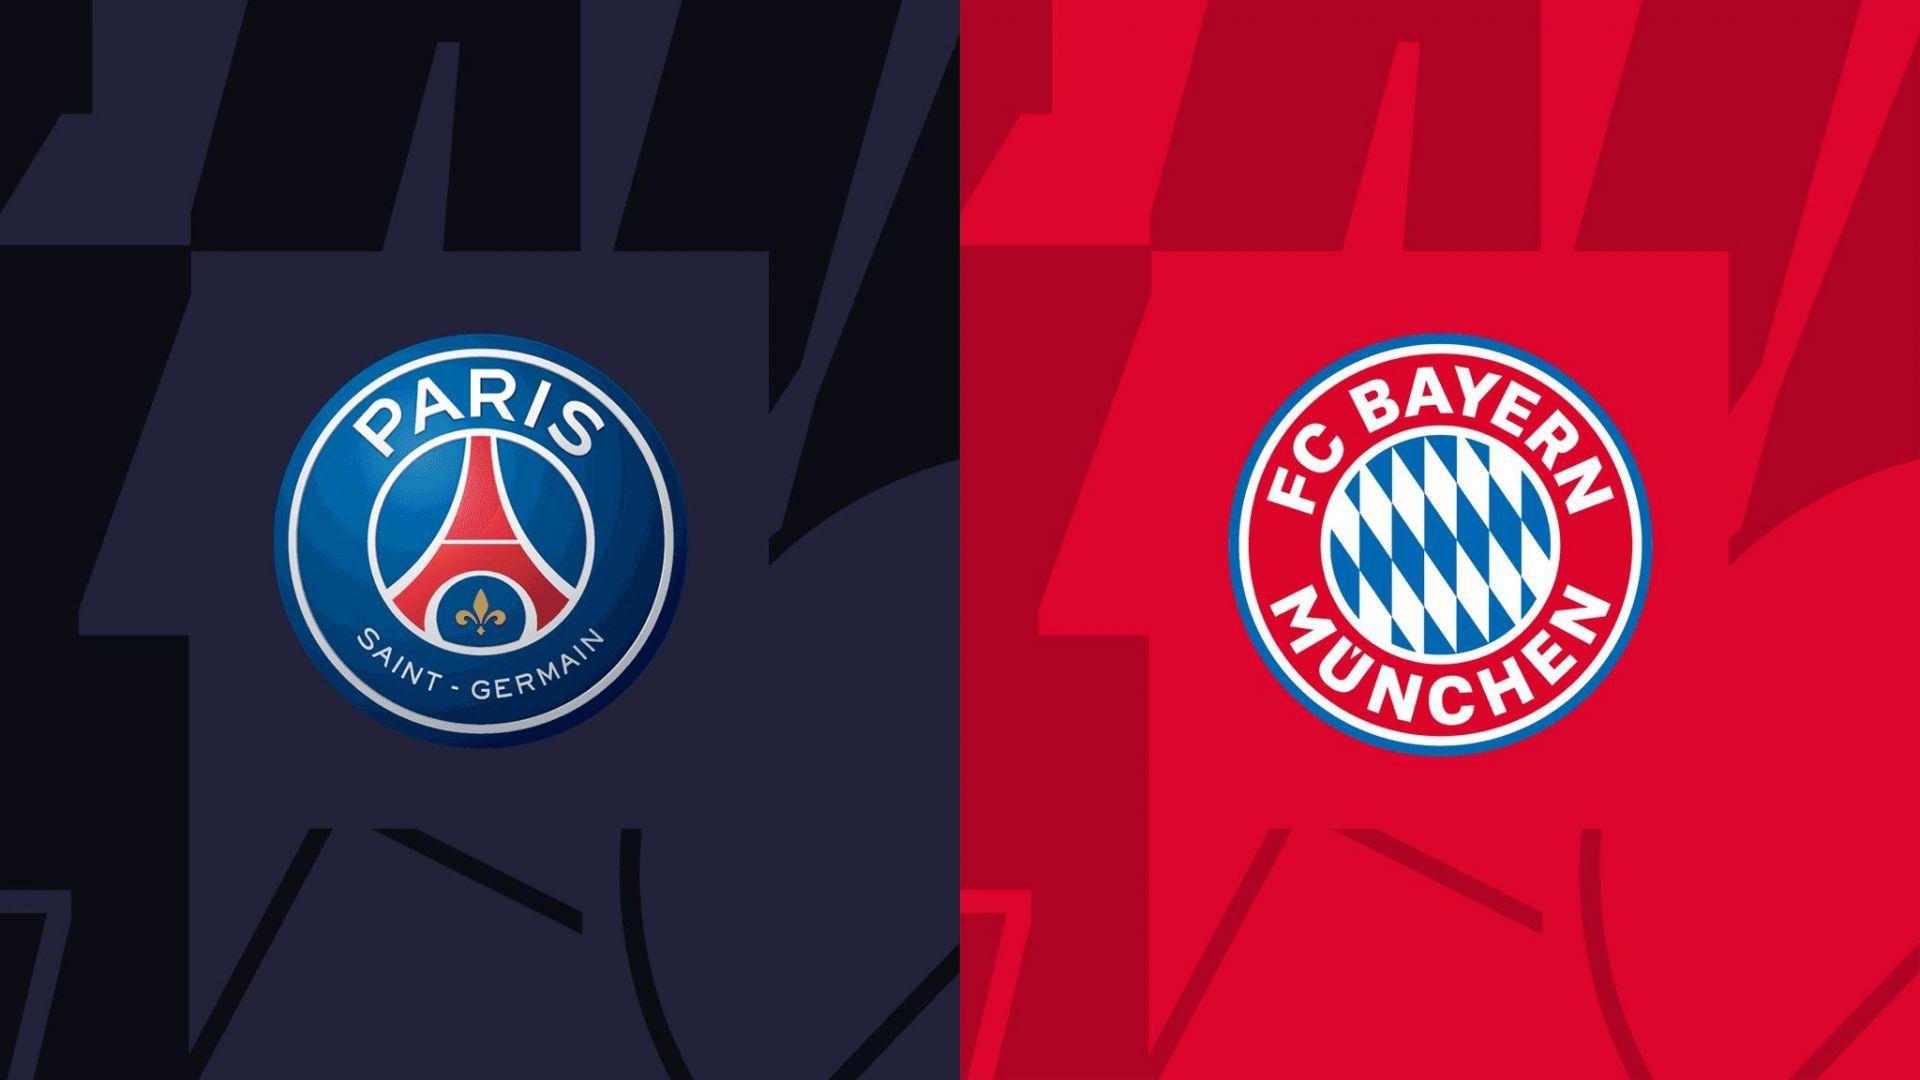 PSG will host Bayern Munich at the Parc des Princes in the UCL Round of 16 1st leg.